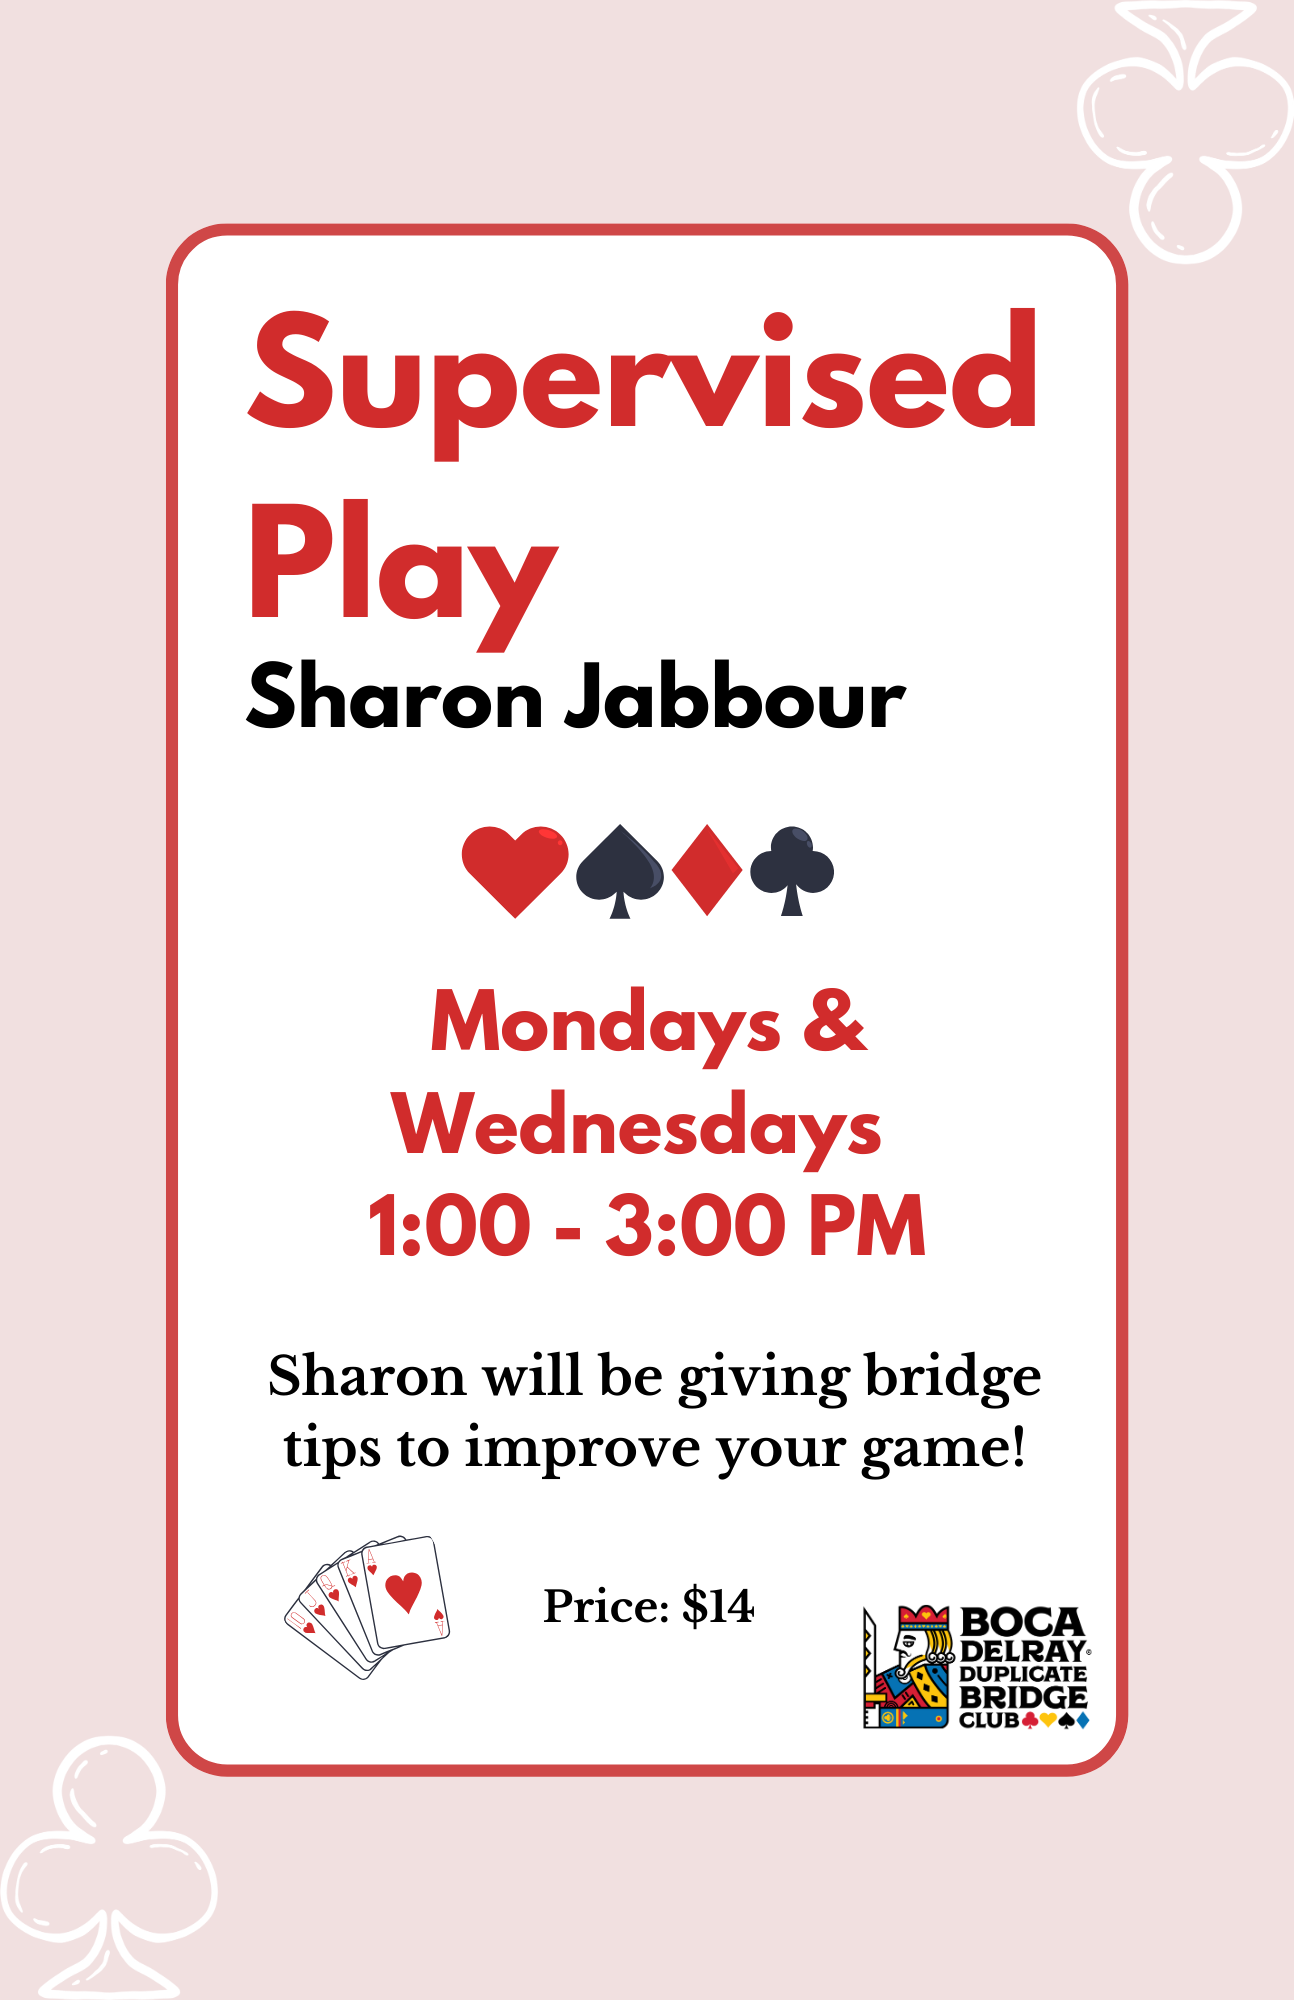 Supervised Play with Sharon Jabbour